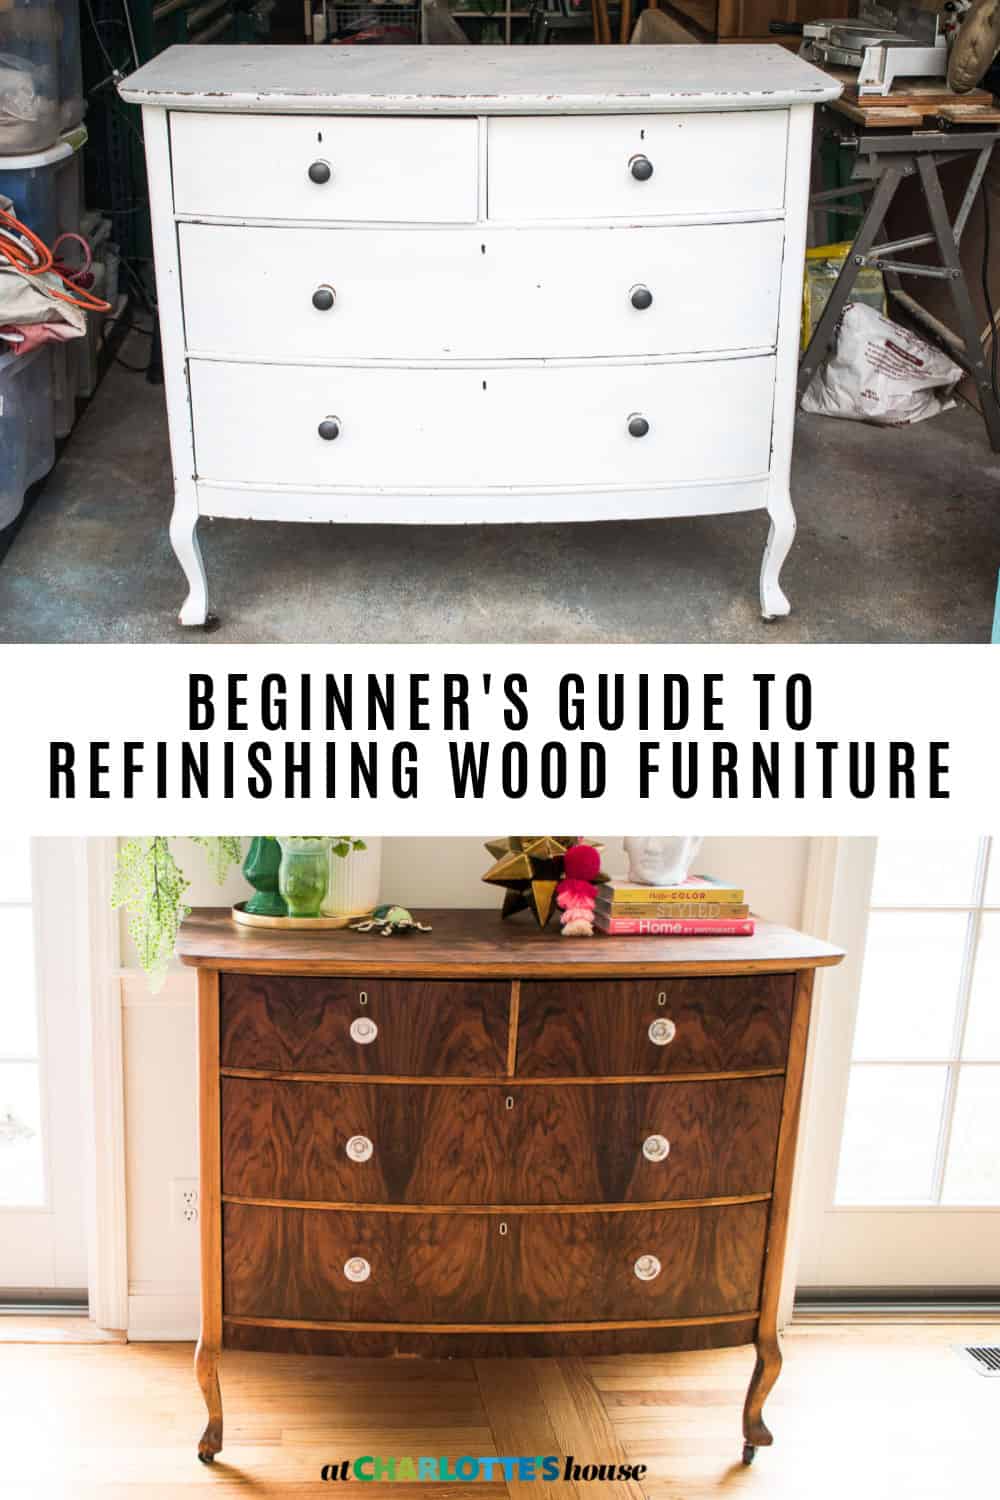 Steps How To Refinish Wooden Furniture To A Raw Wood Or Natural Wood ...